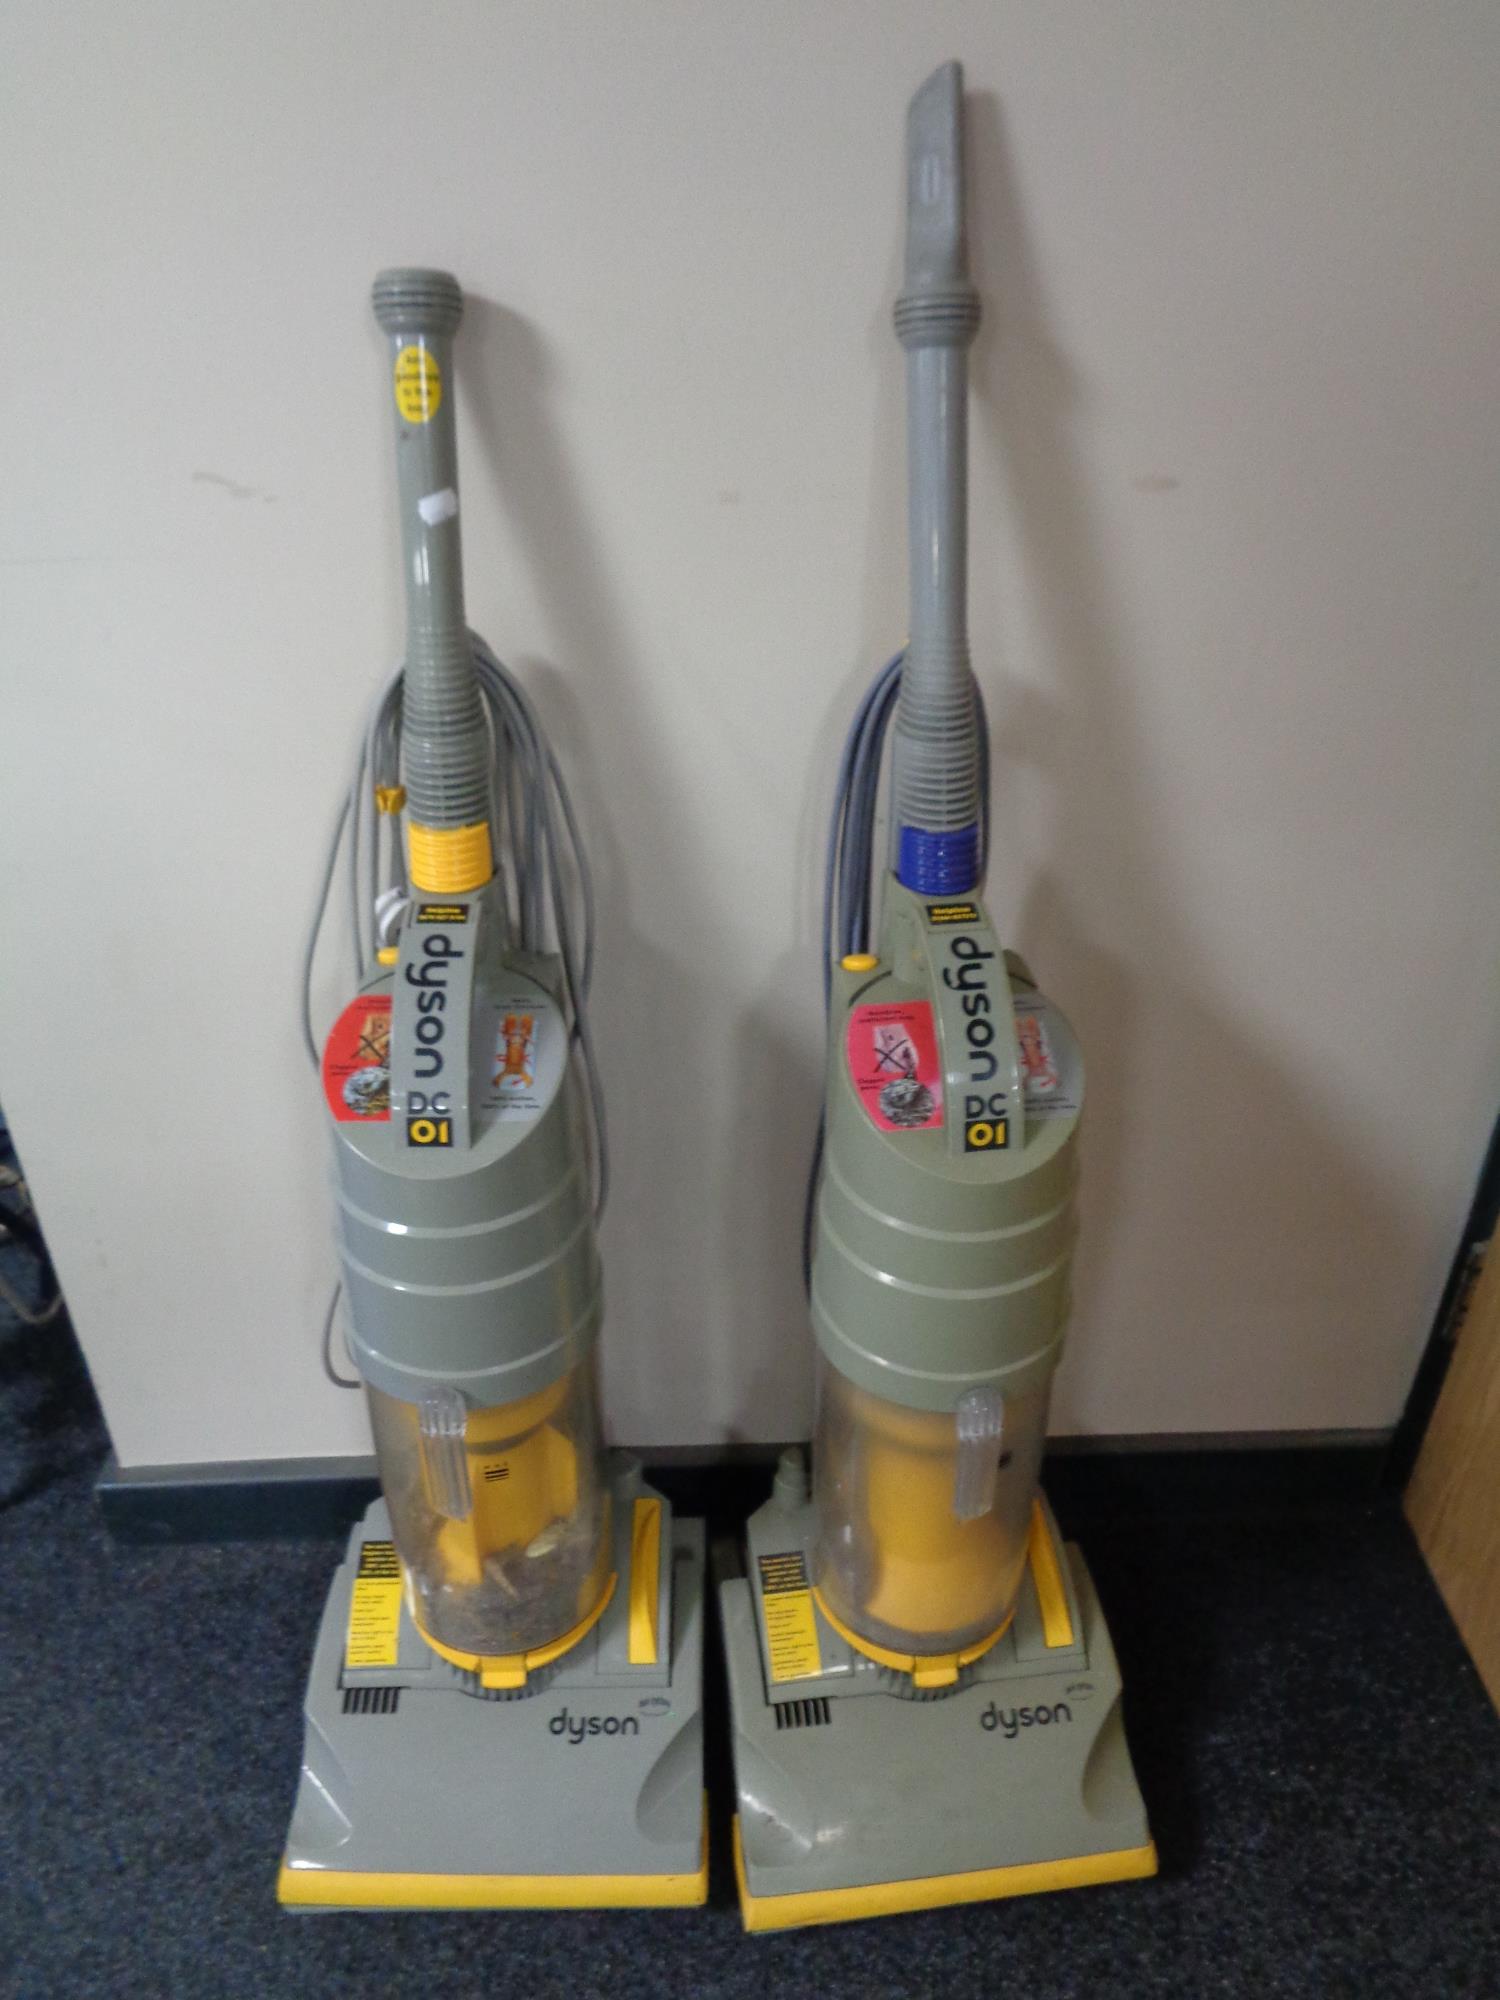 Two Dyson DC01 upright vacuums